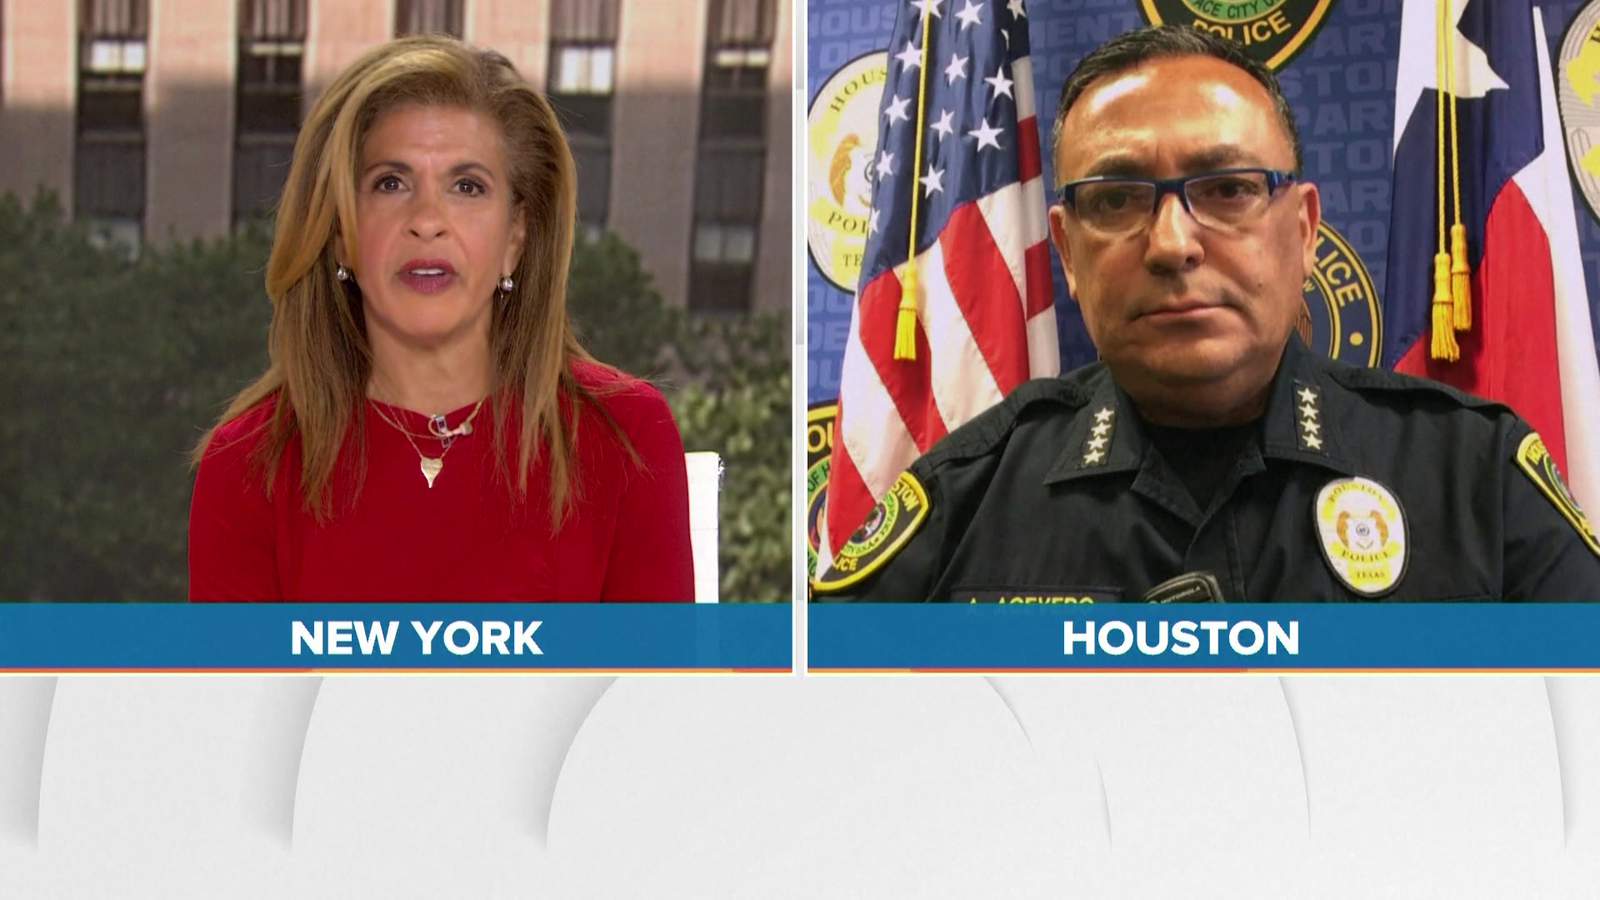 Acevedo questioned about video of Houstons recent officer-involved shootings during TODAY Show interview